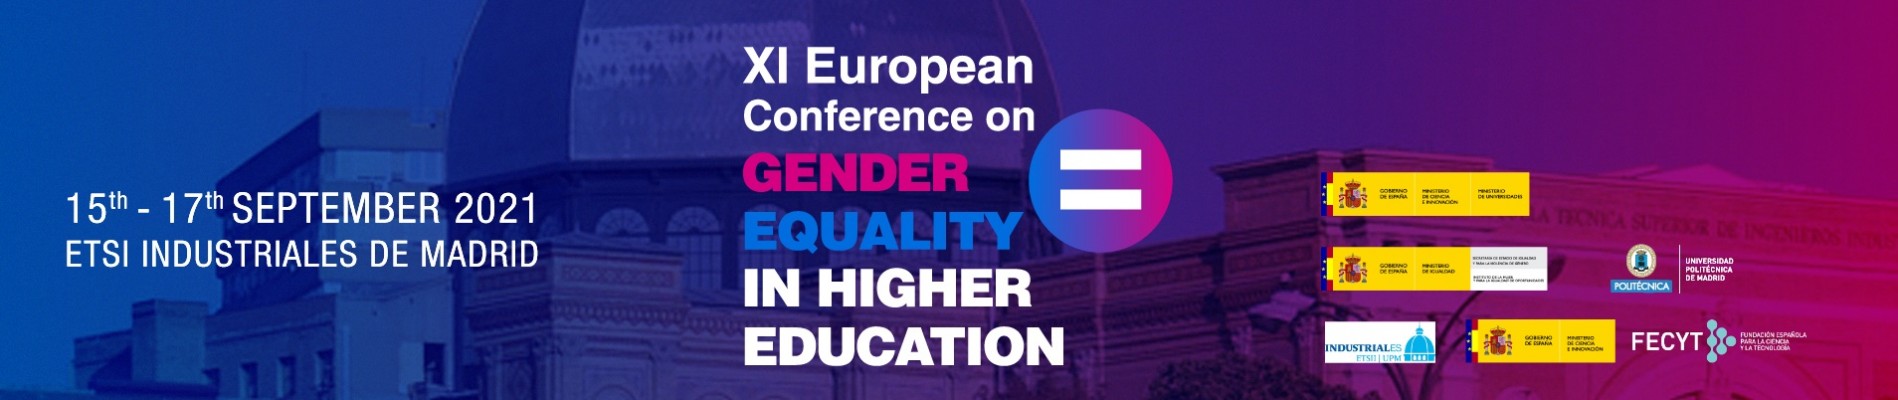 XI European Conference on Gender Equality in Higher Education APLAZADO 15-16-17 sept.2021 - Inicio